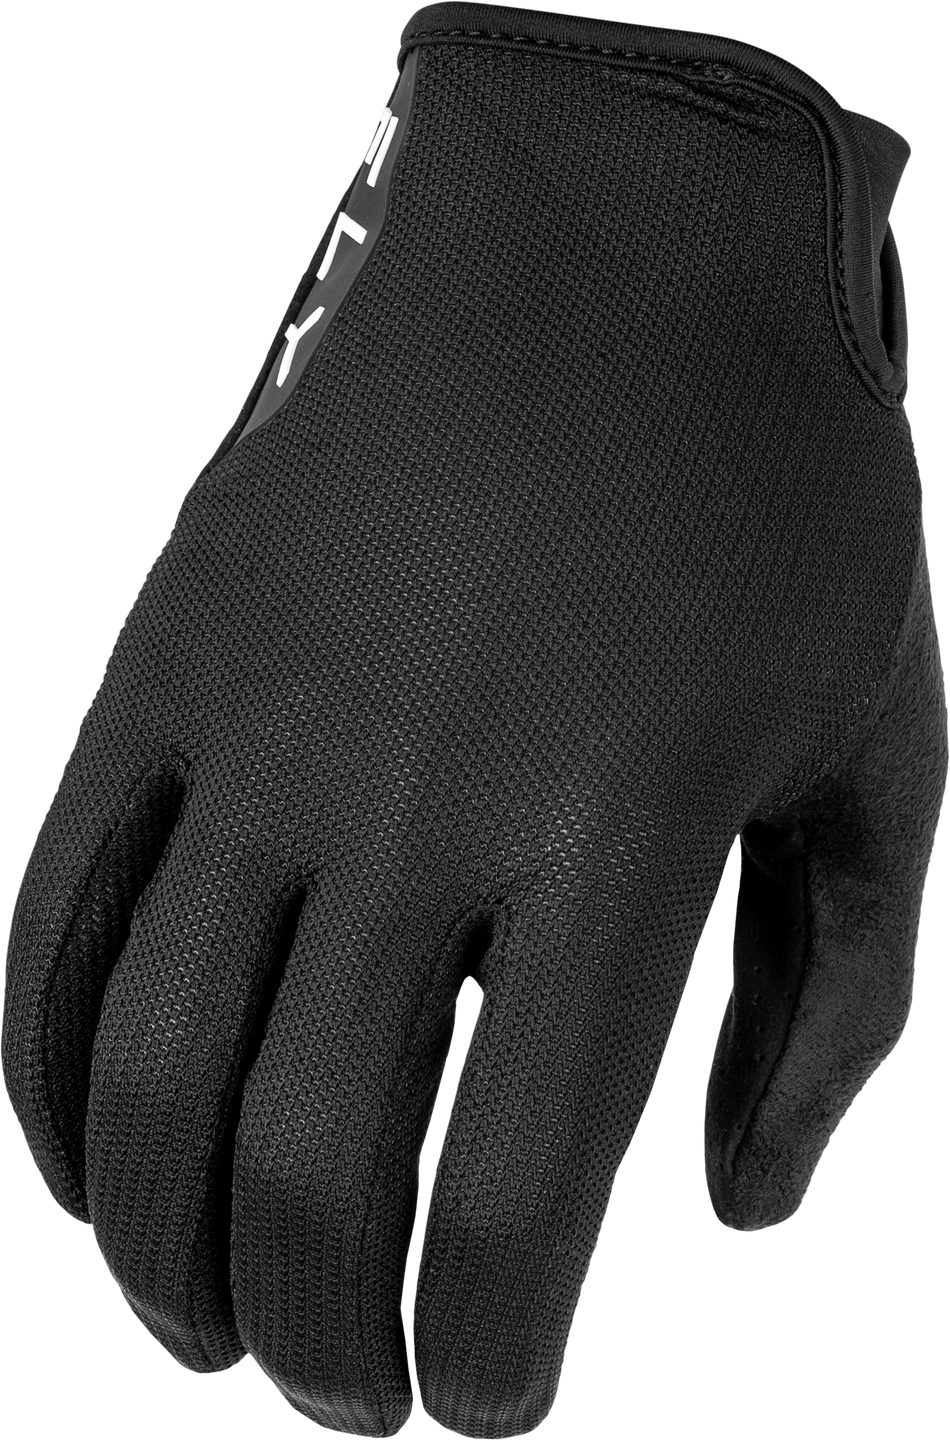 FLY RACING Mesh Gloves Black Md 375-330M